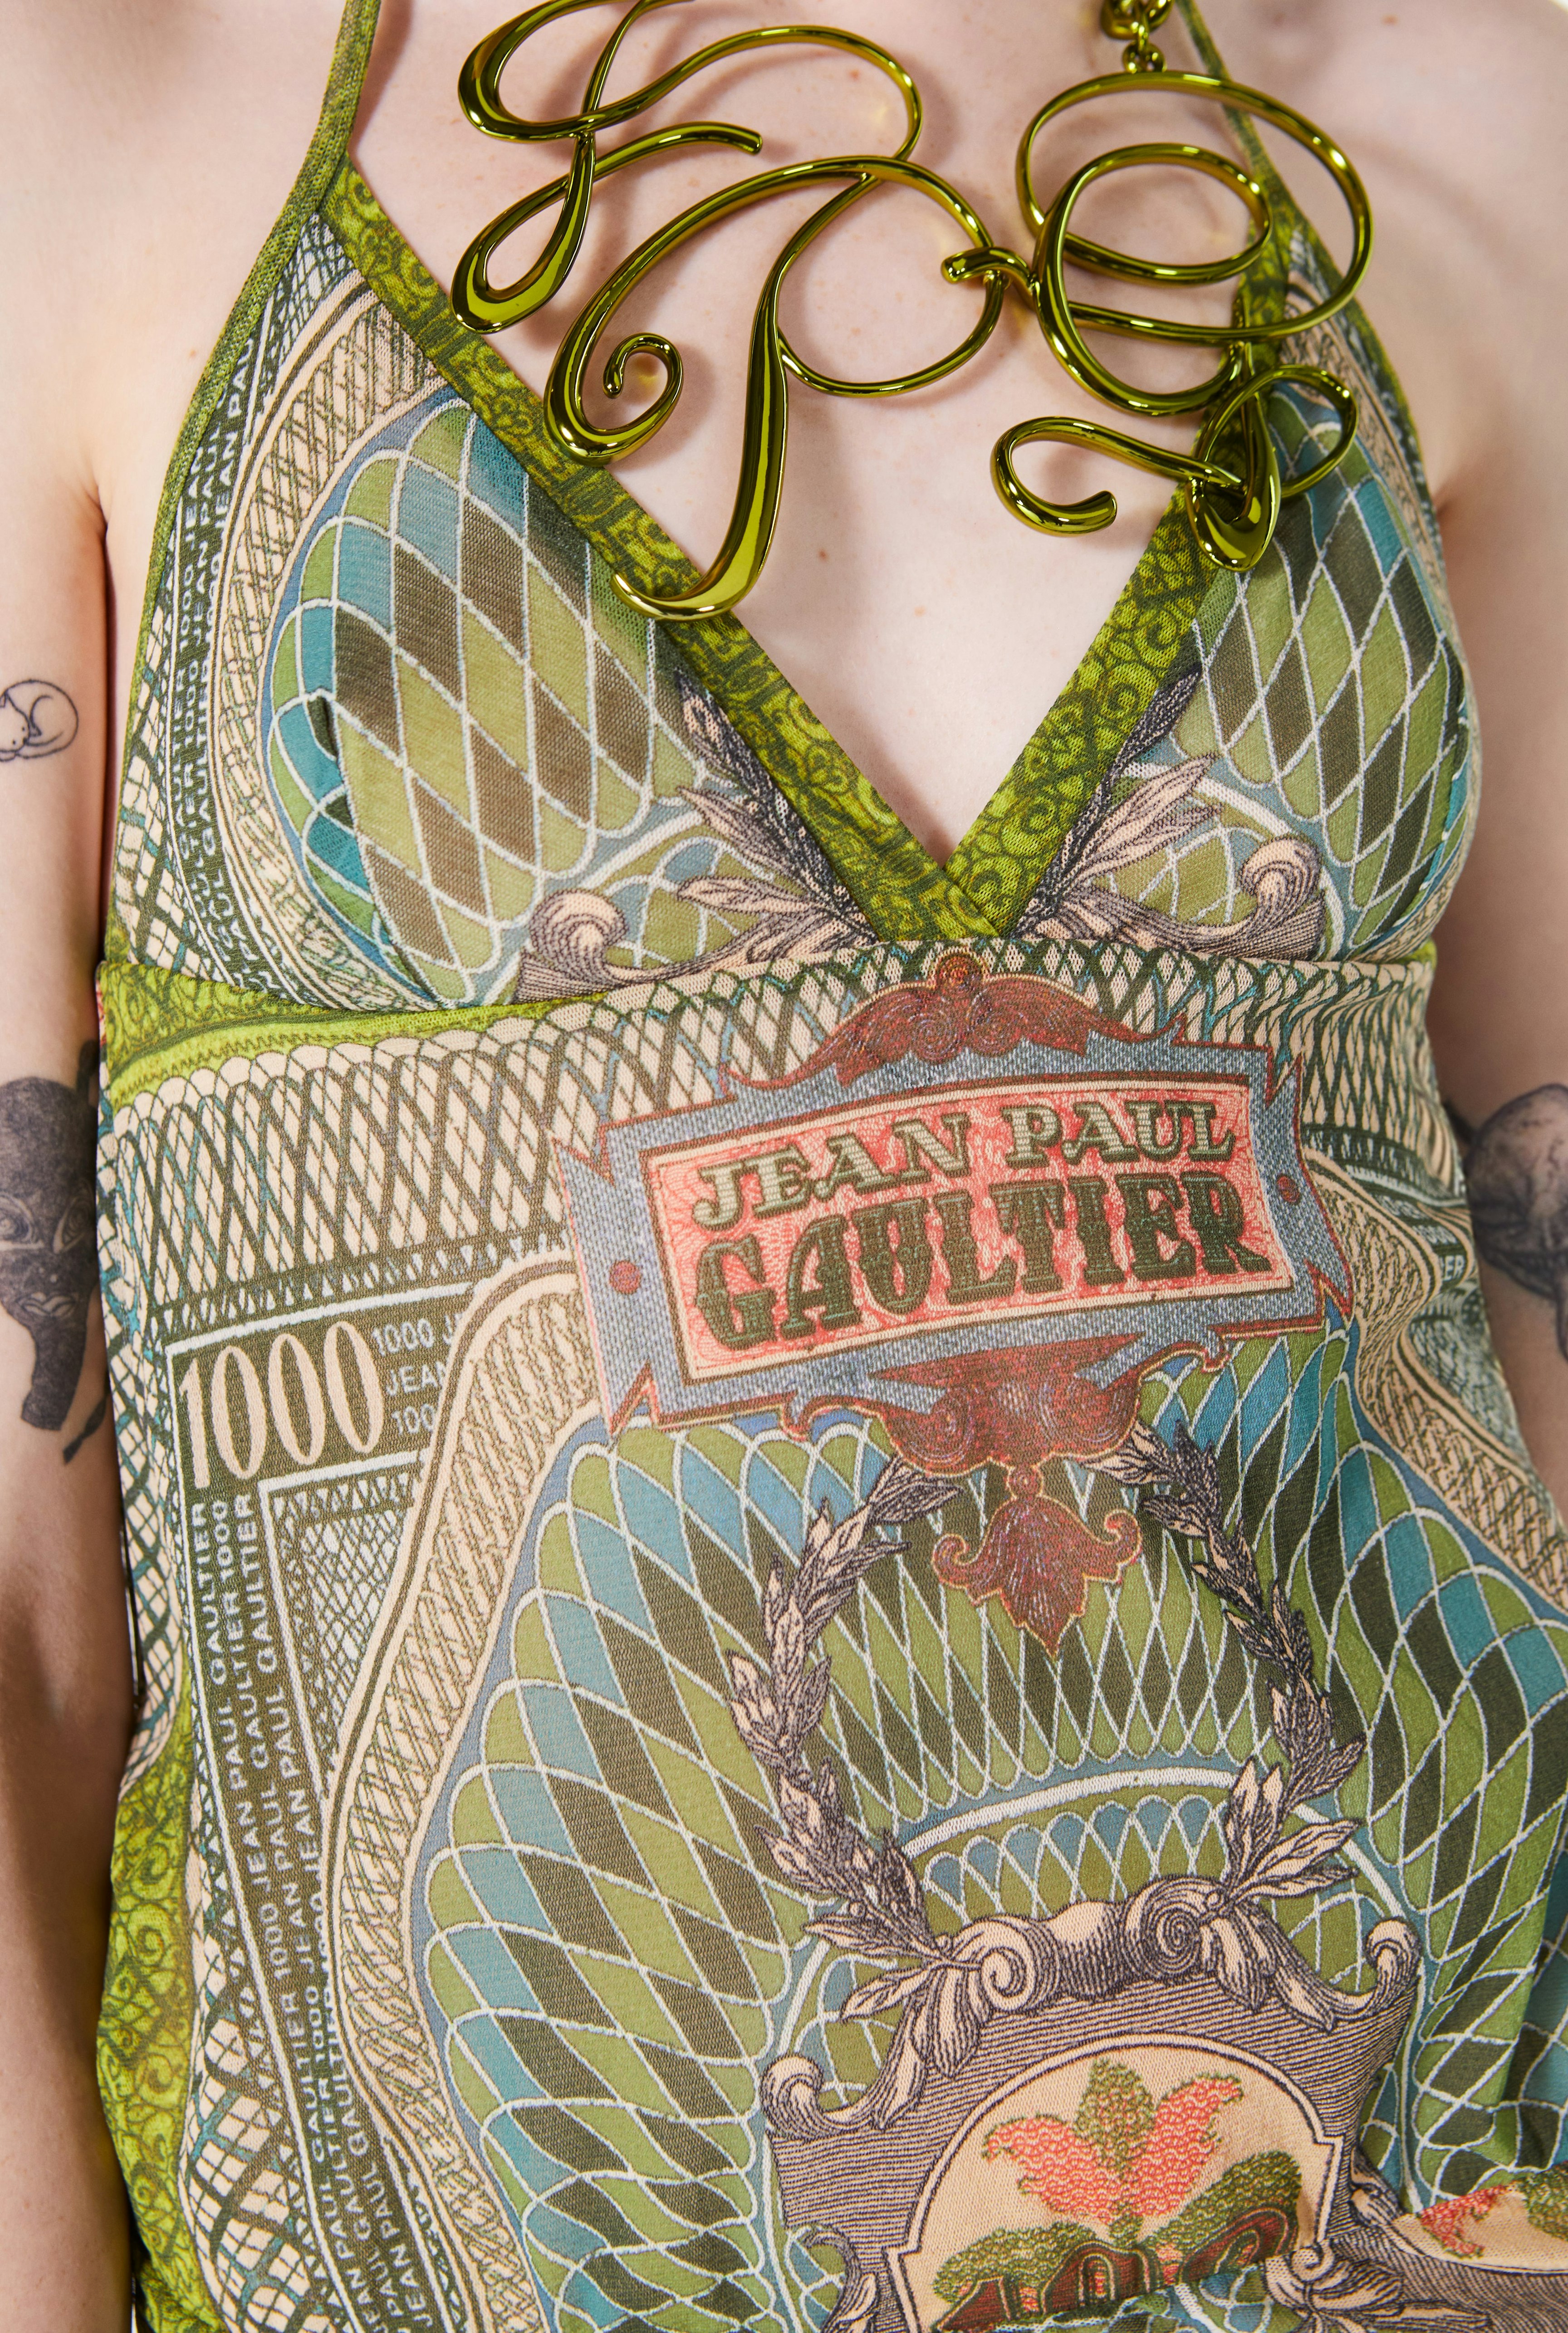 The Banknote Sarong Dress Jean Paul Gaultier